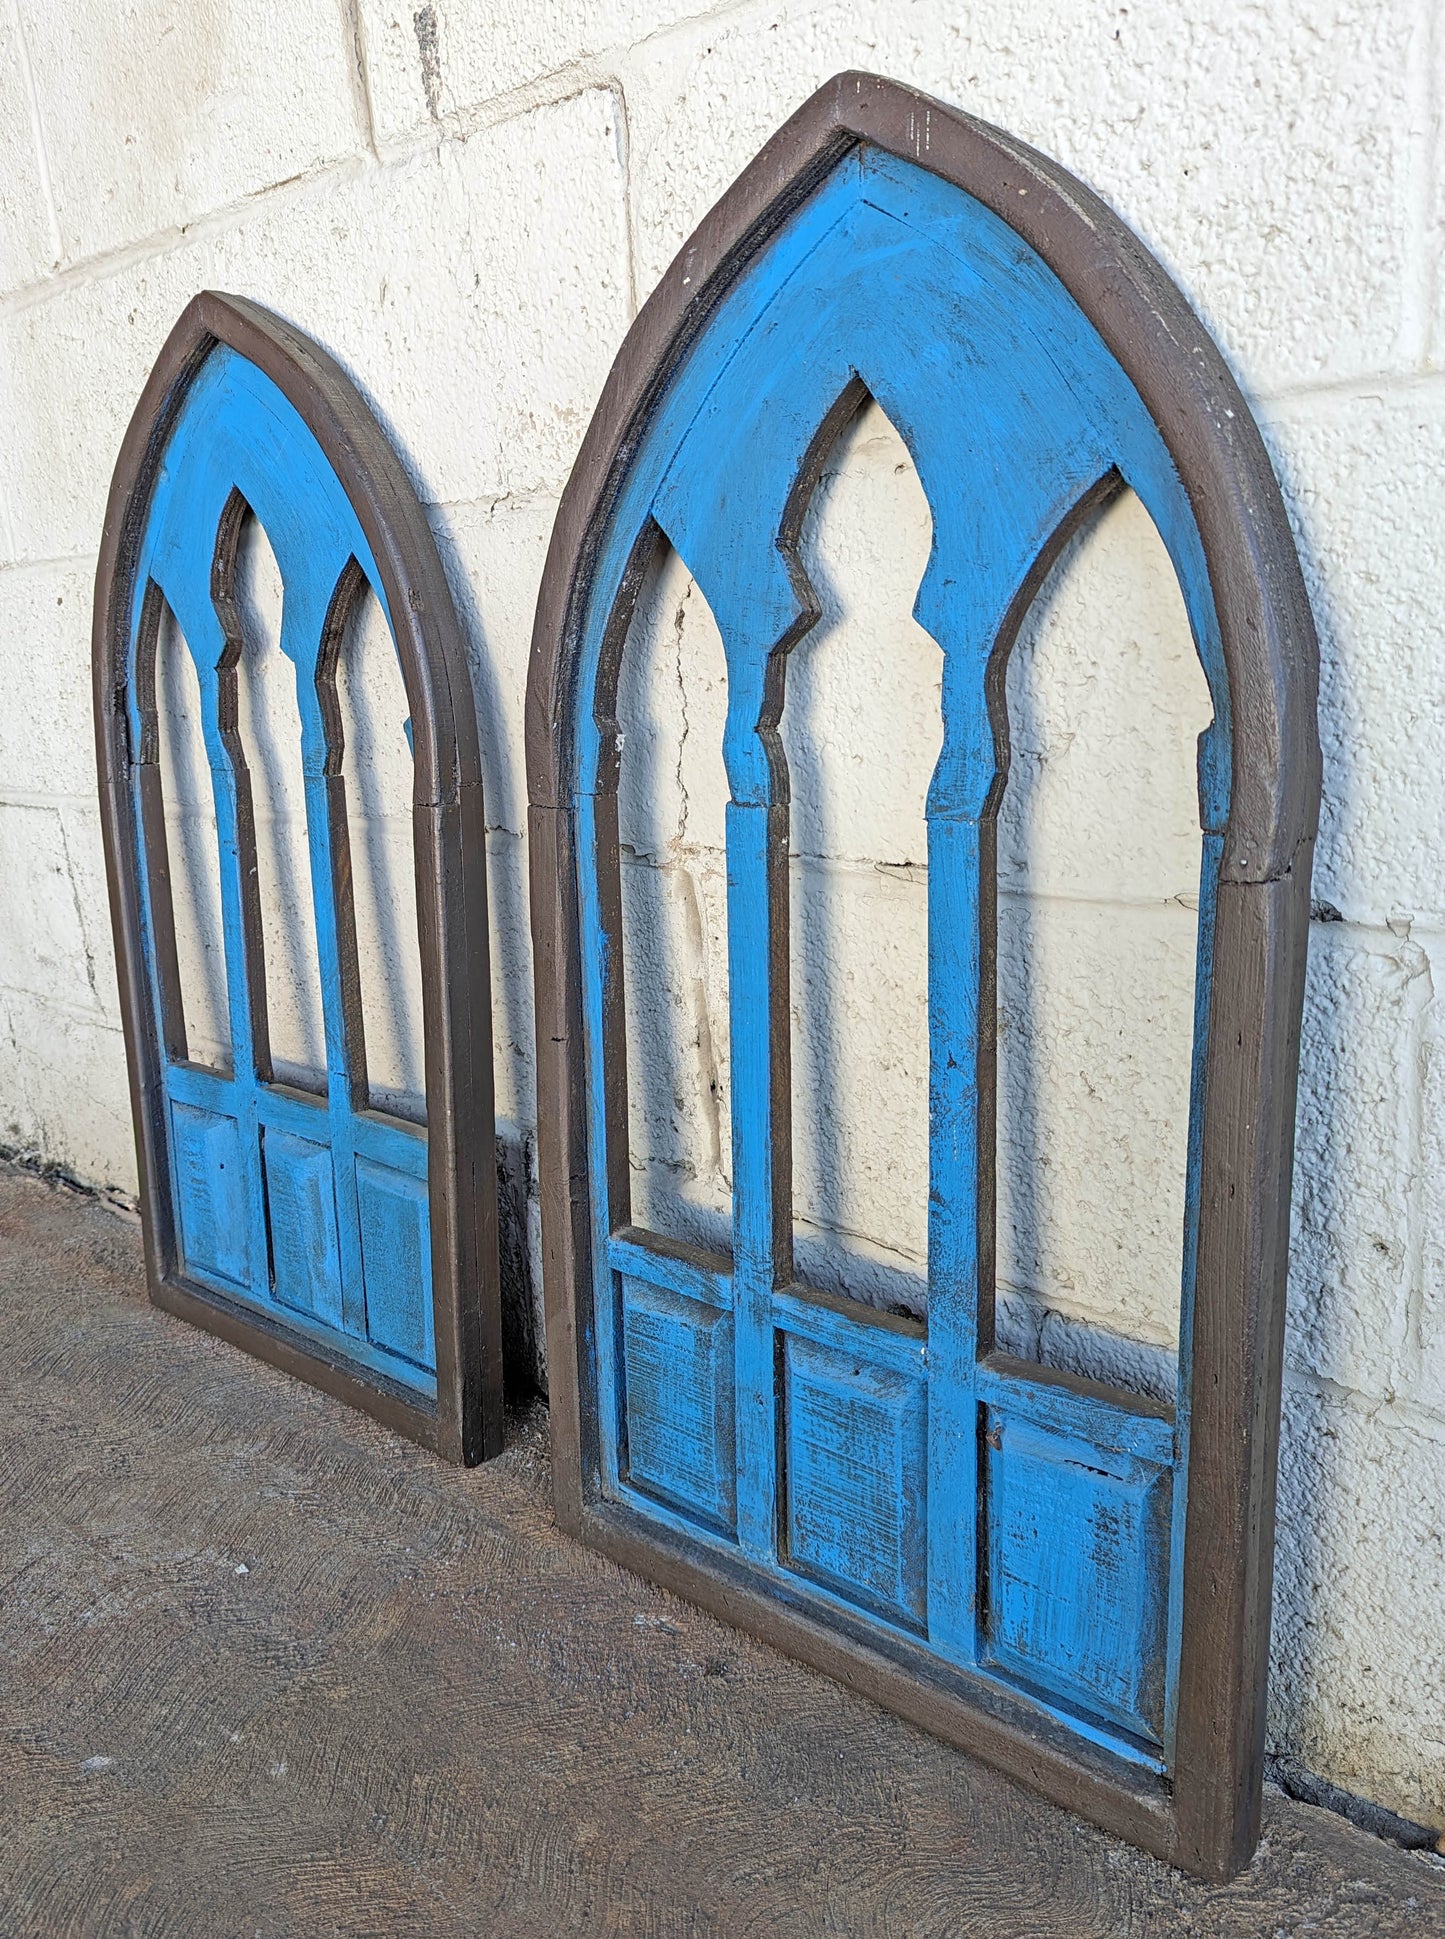 18"x30" Pair Vintage Old SOLID Wood Wooden Wall Art Hanging Decor Arched Gothic Window Panel Handmade Homemade Hand Home Made Decoration